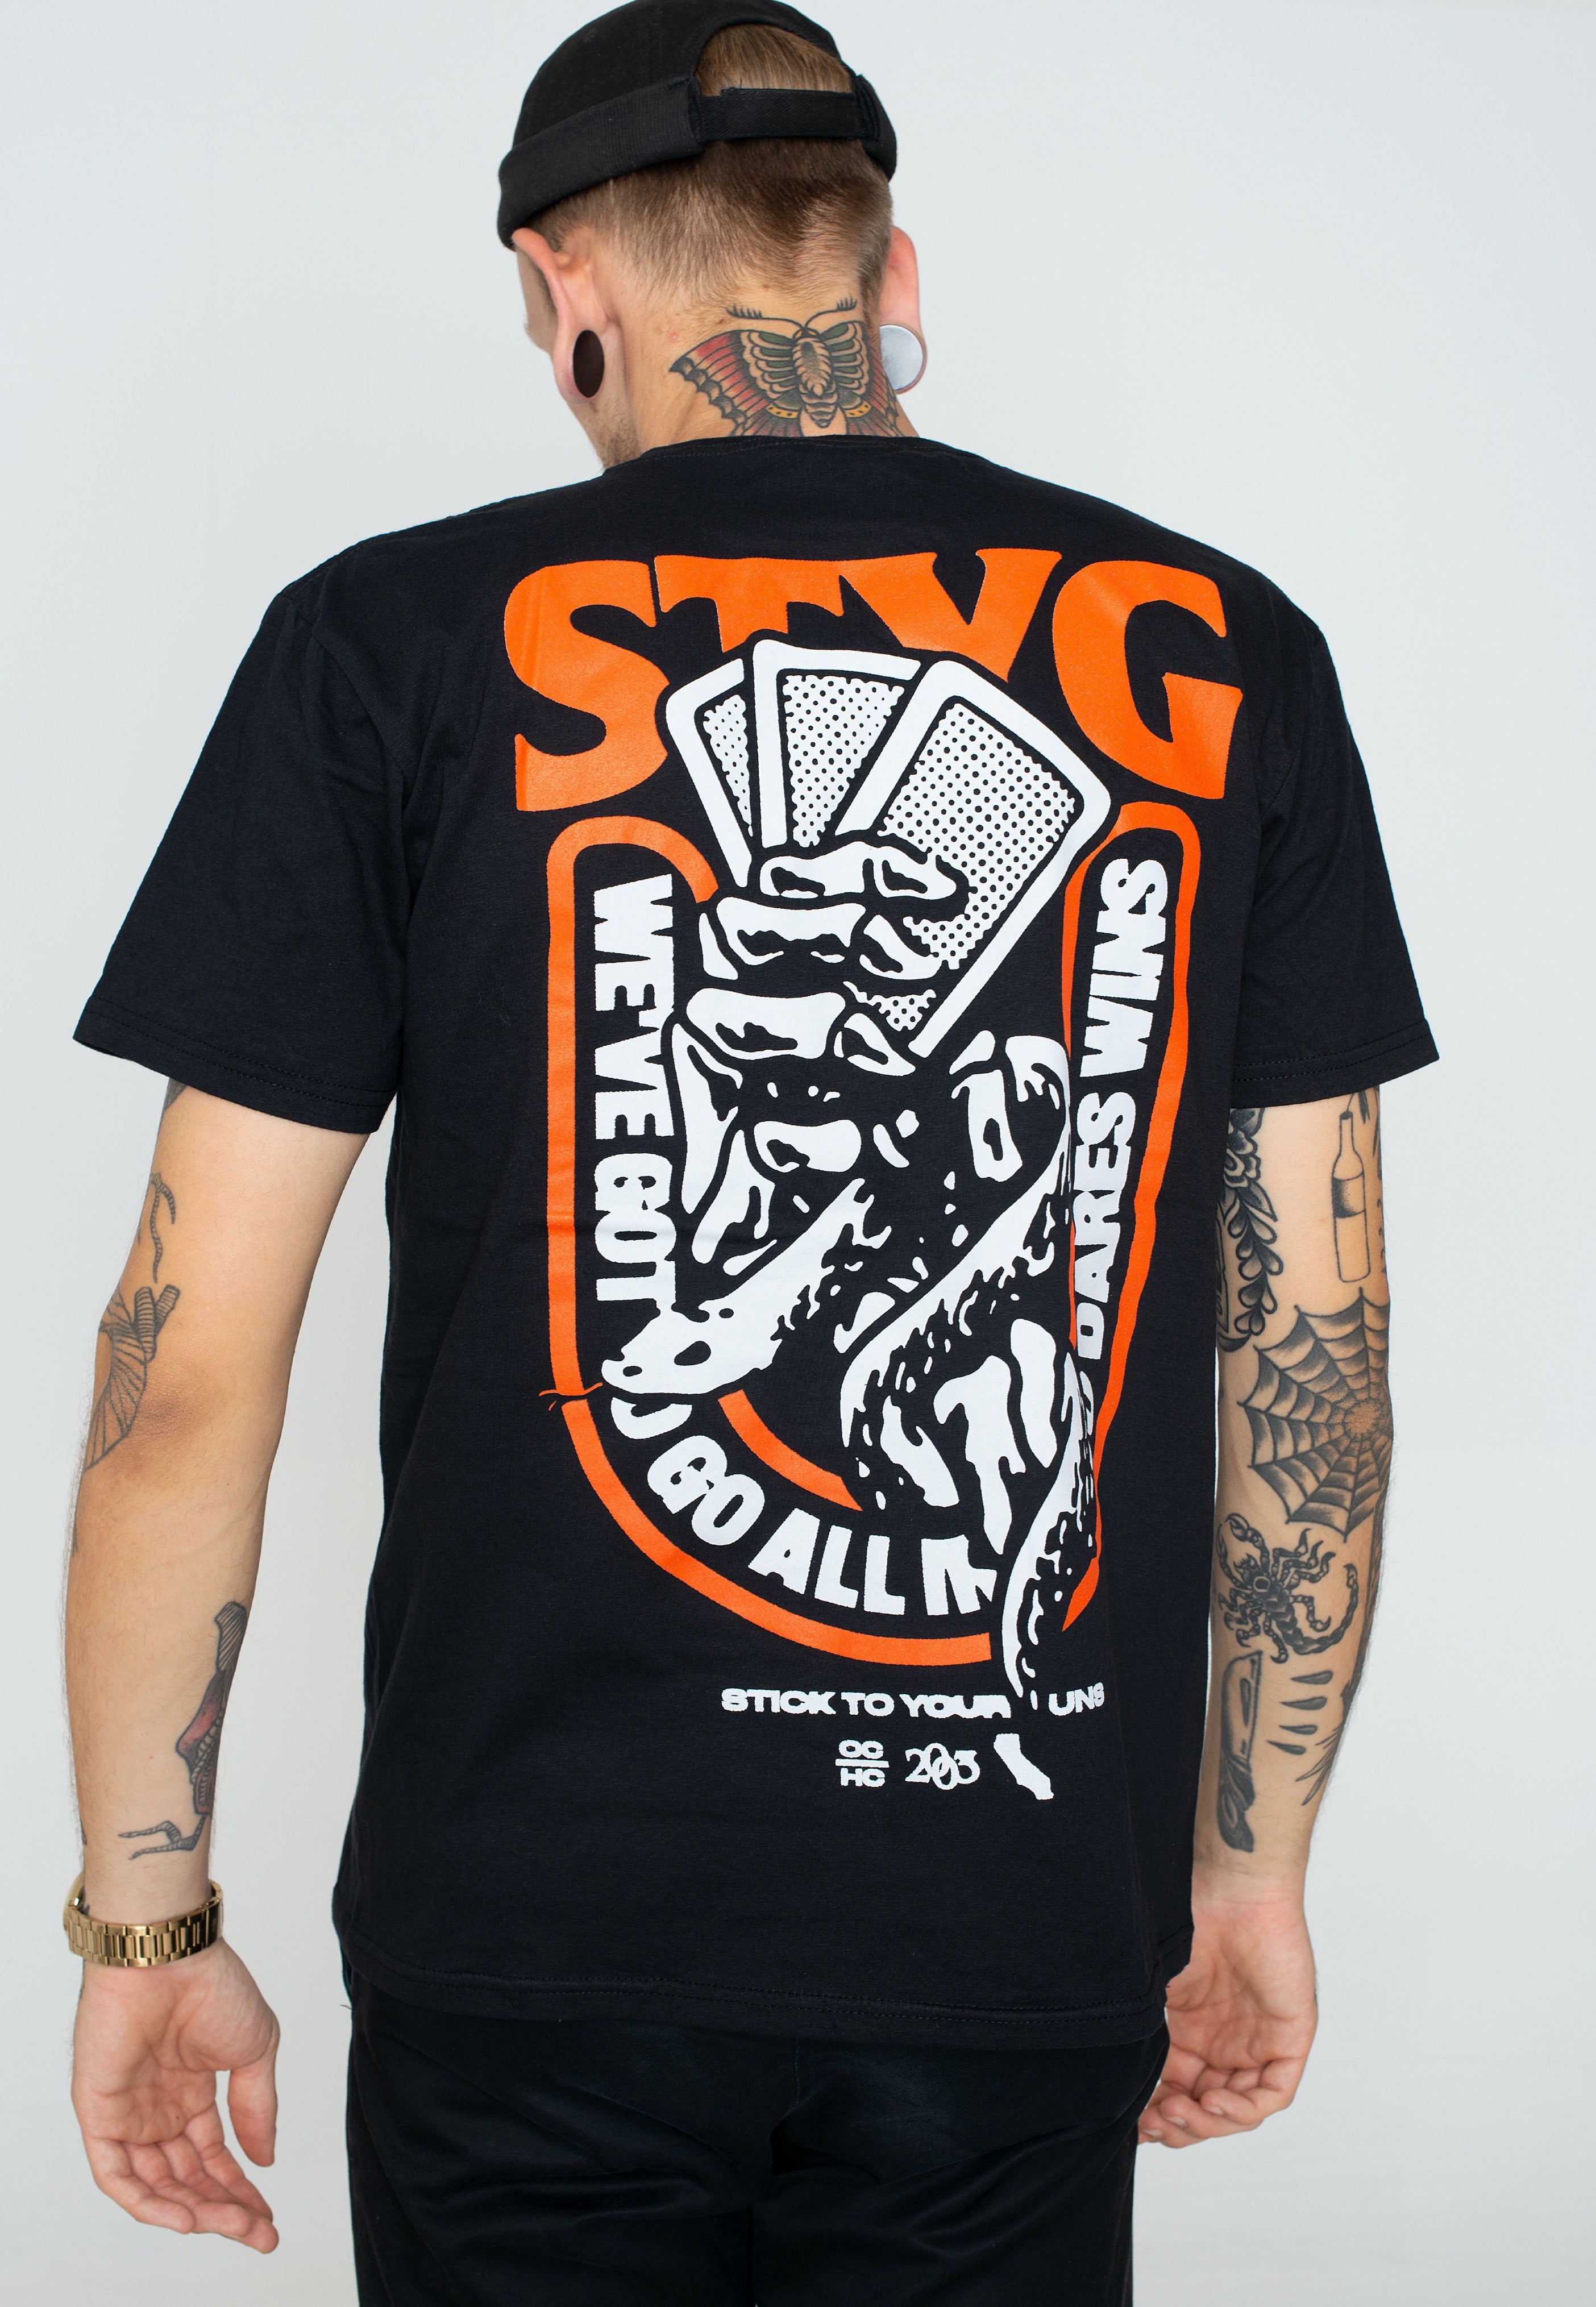 Stick To Your Guns - Go All In - T-Shirt | Men-Image